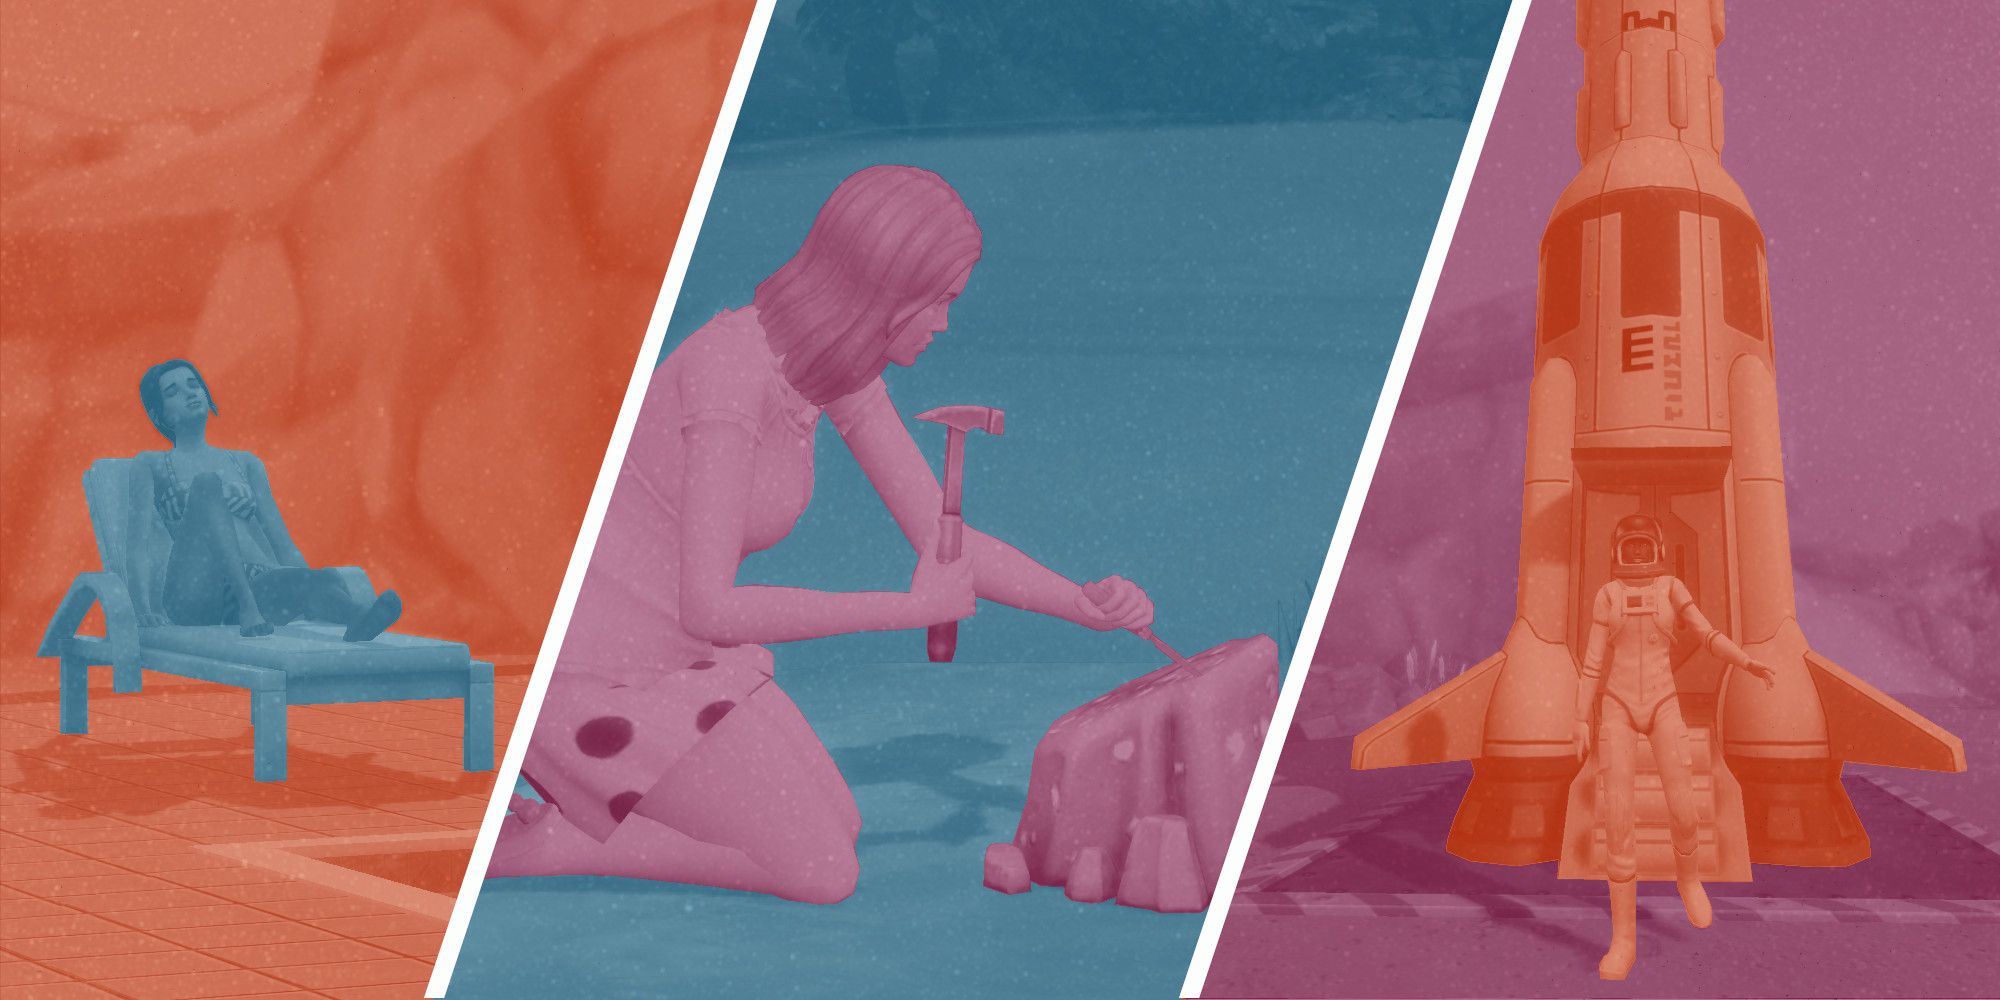 Three colorfully edited screenshots from The Sims 4. A Sim sunbathing, a Sim digging into a rock, and a Sim exiting a rocket ship